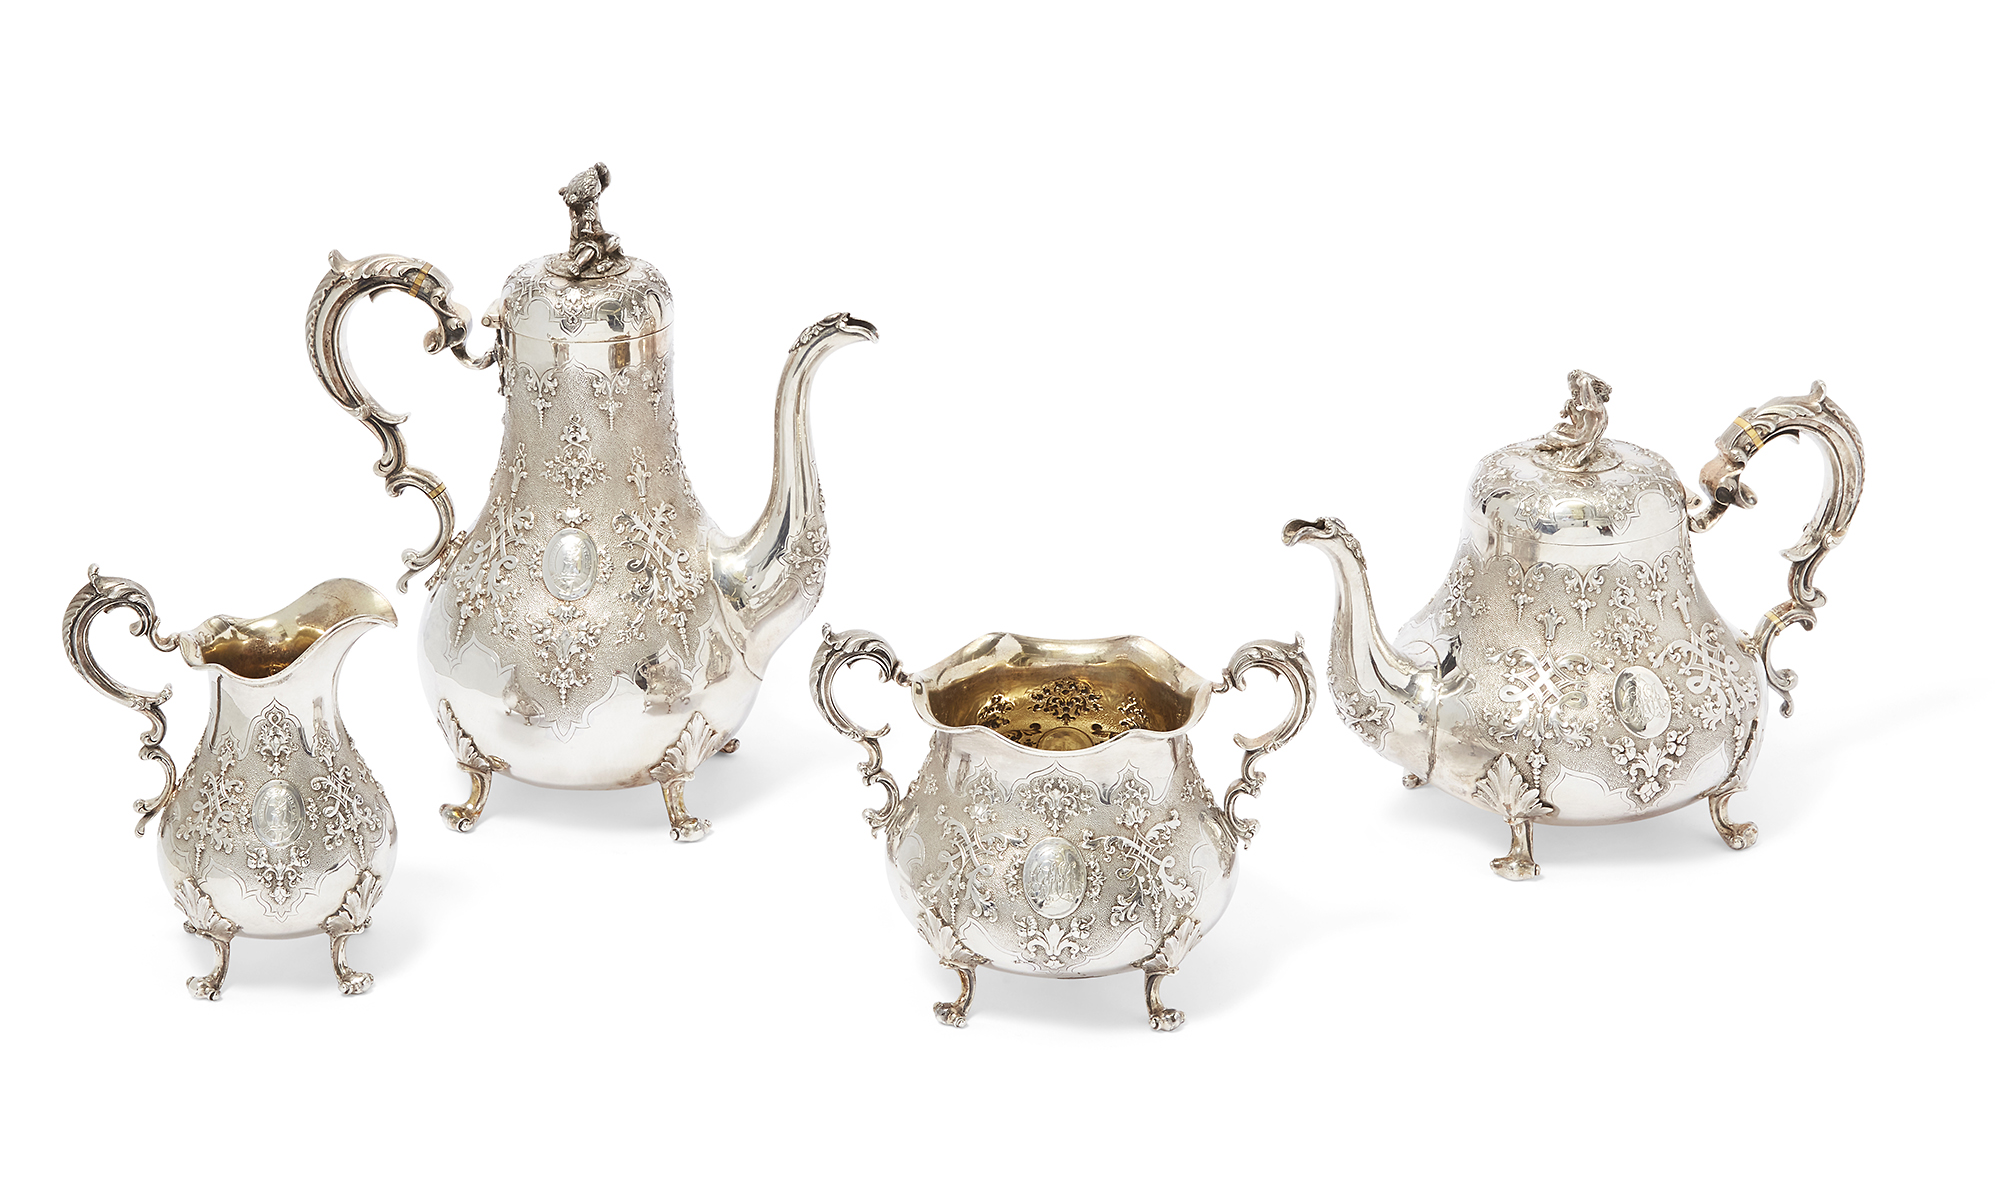 A four piece Victorian silver tea set, London, 1860, Robert Hennell III, in fitted Hunt & Roskell... - Image 2 of 3